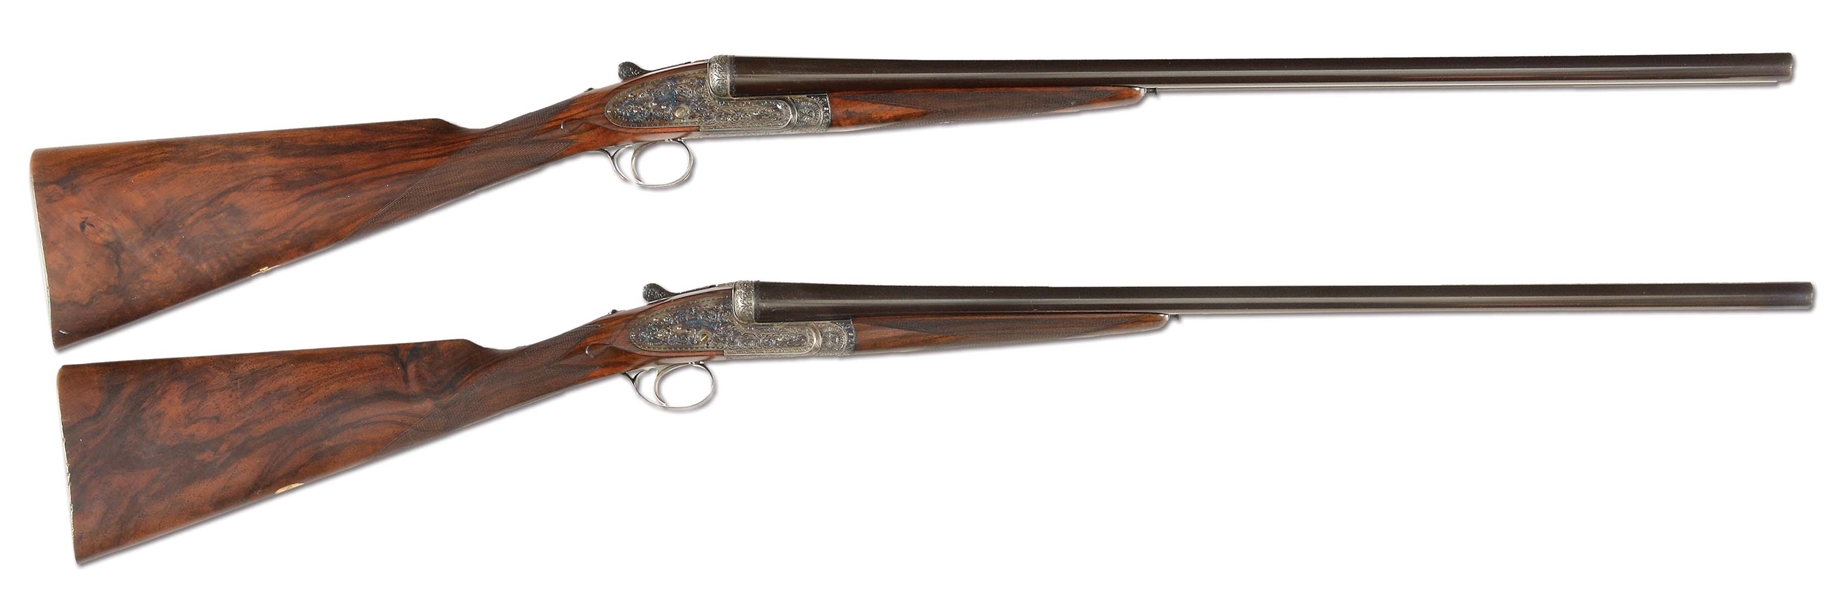 (M) FINE MATCHED PAIR OF CLASSICALLY STYLED HOLLAND & HOLLAND ROYAL EJECTOR SINGLE TRIGGER SELF OPENING GAME SHOTGUNS.